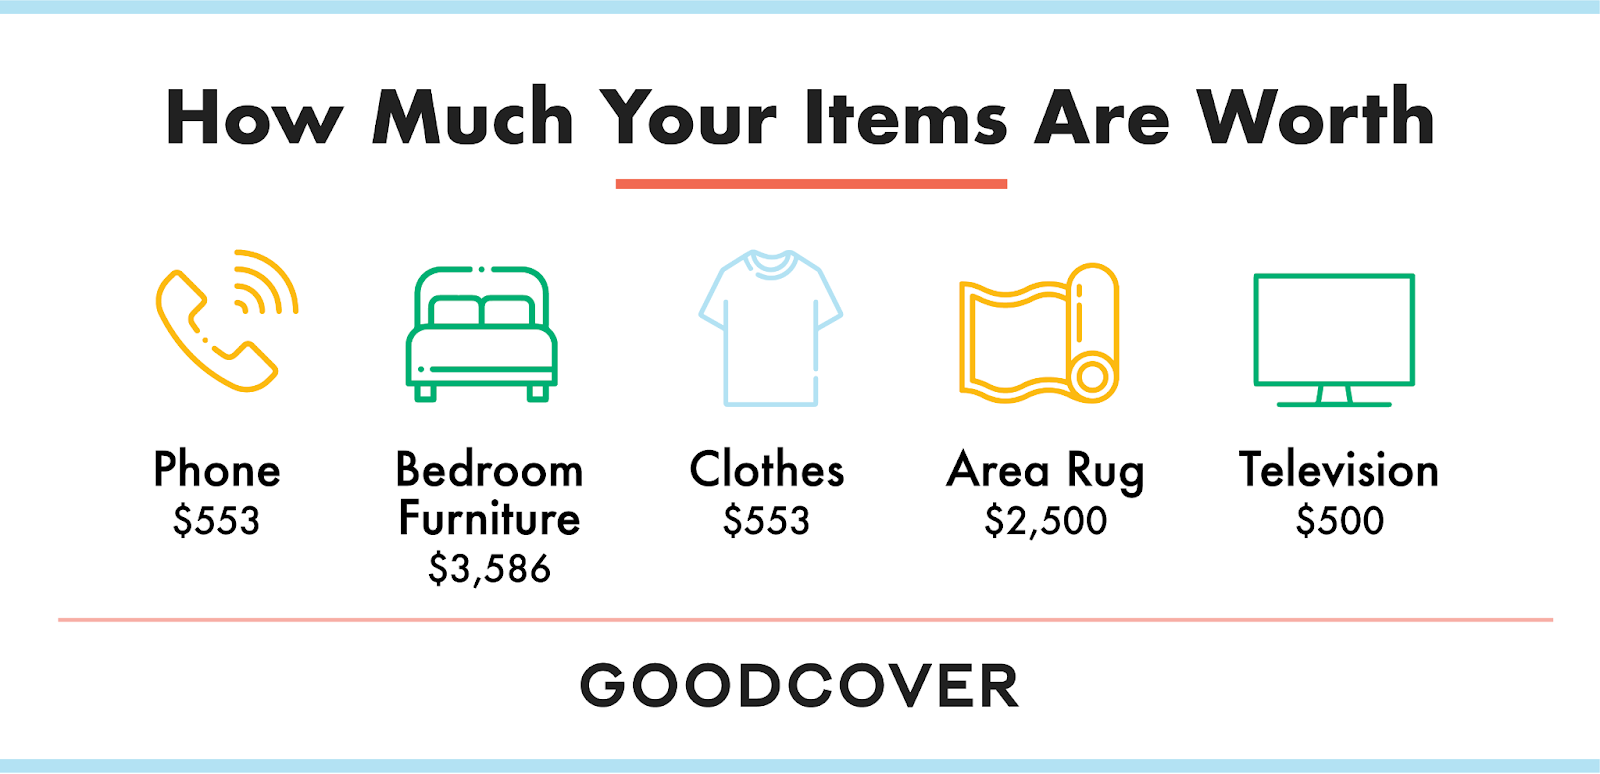 infographic showing how much items in your home are worth.